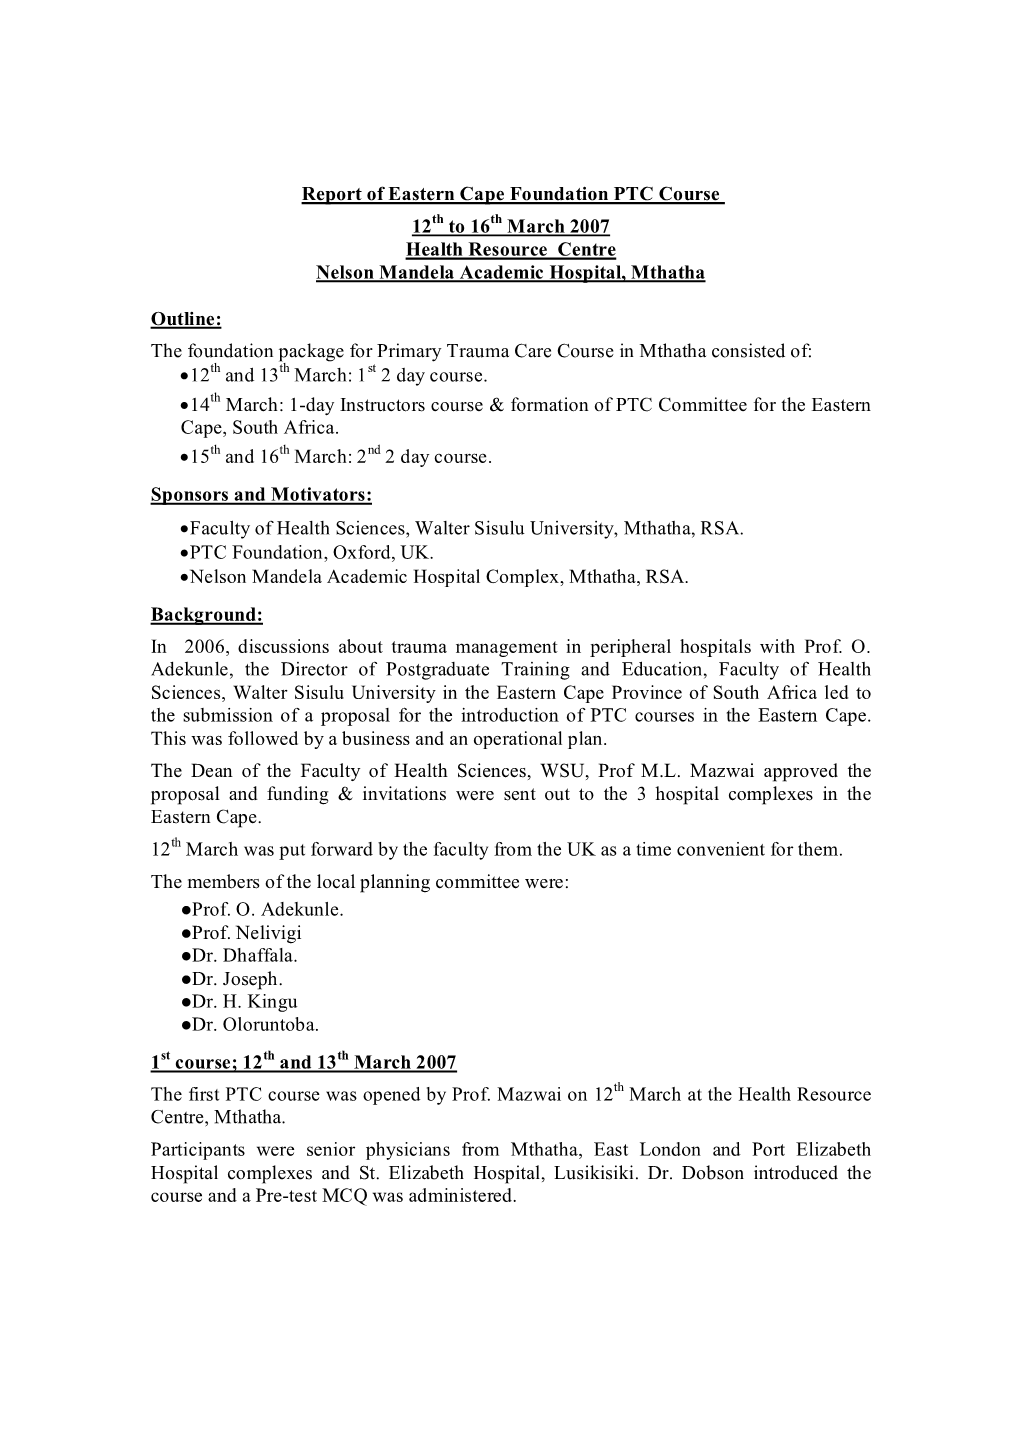 Report of Eastern Cape Foundation PTC Course 12 to 16 March 2007